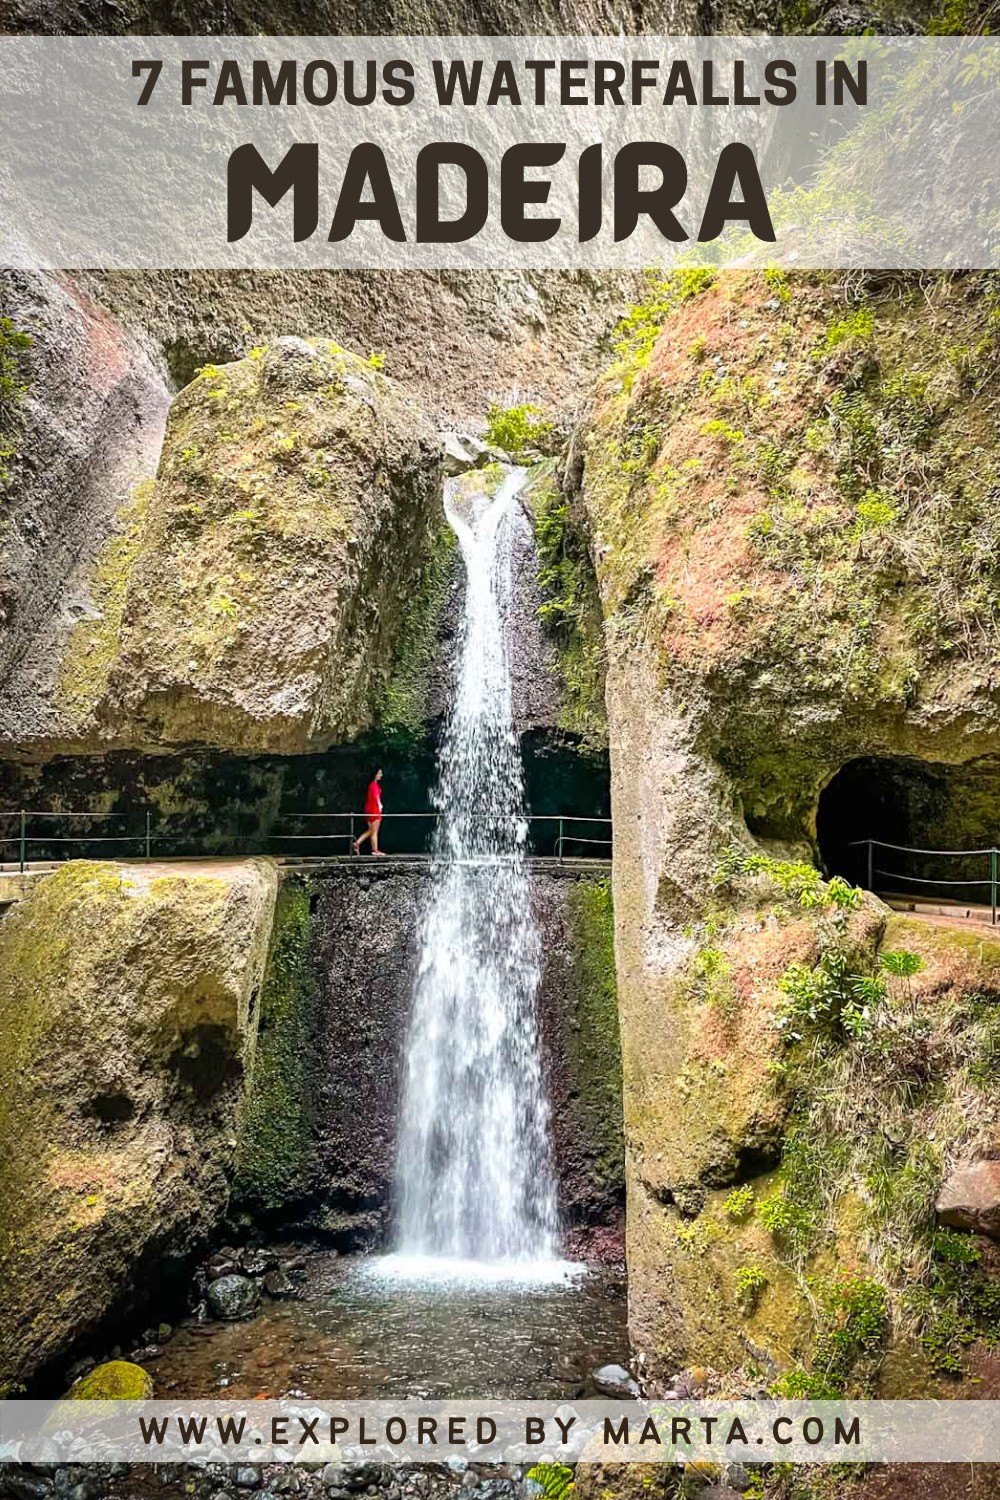 7 famous waterfalls in Madeira